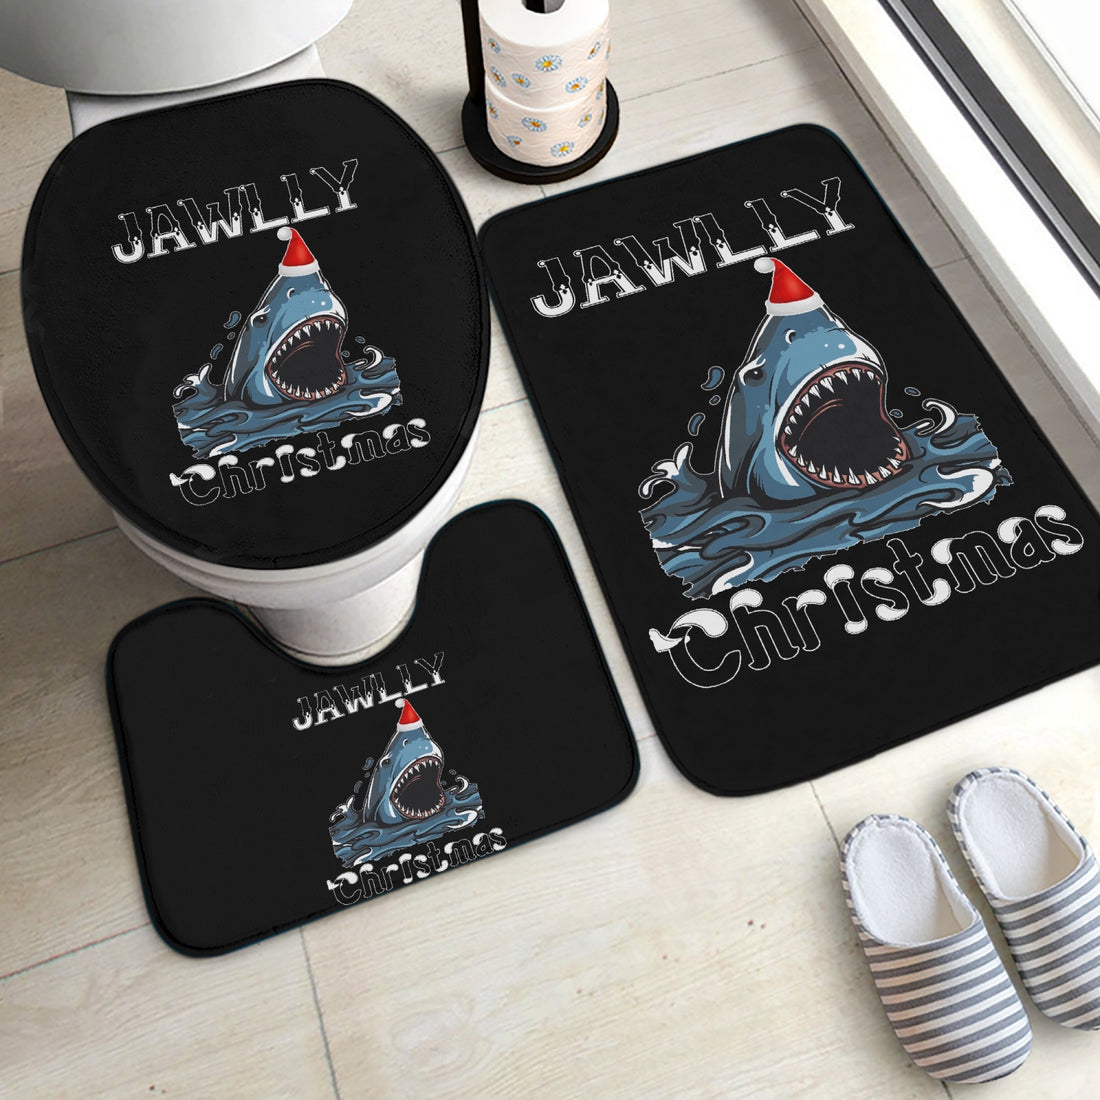 Jawlly Christmas: Stylish and Cozy Toilet Rug Sets for Festive Décor! Home-clothes-jewelry